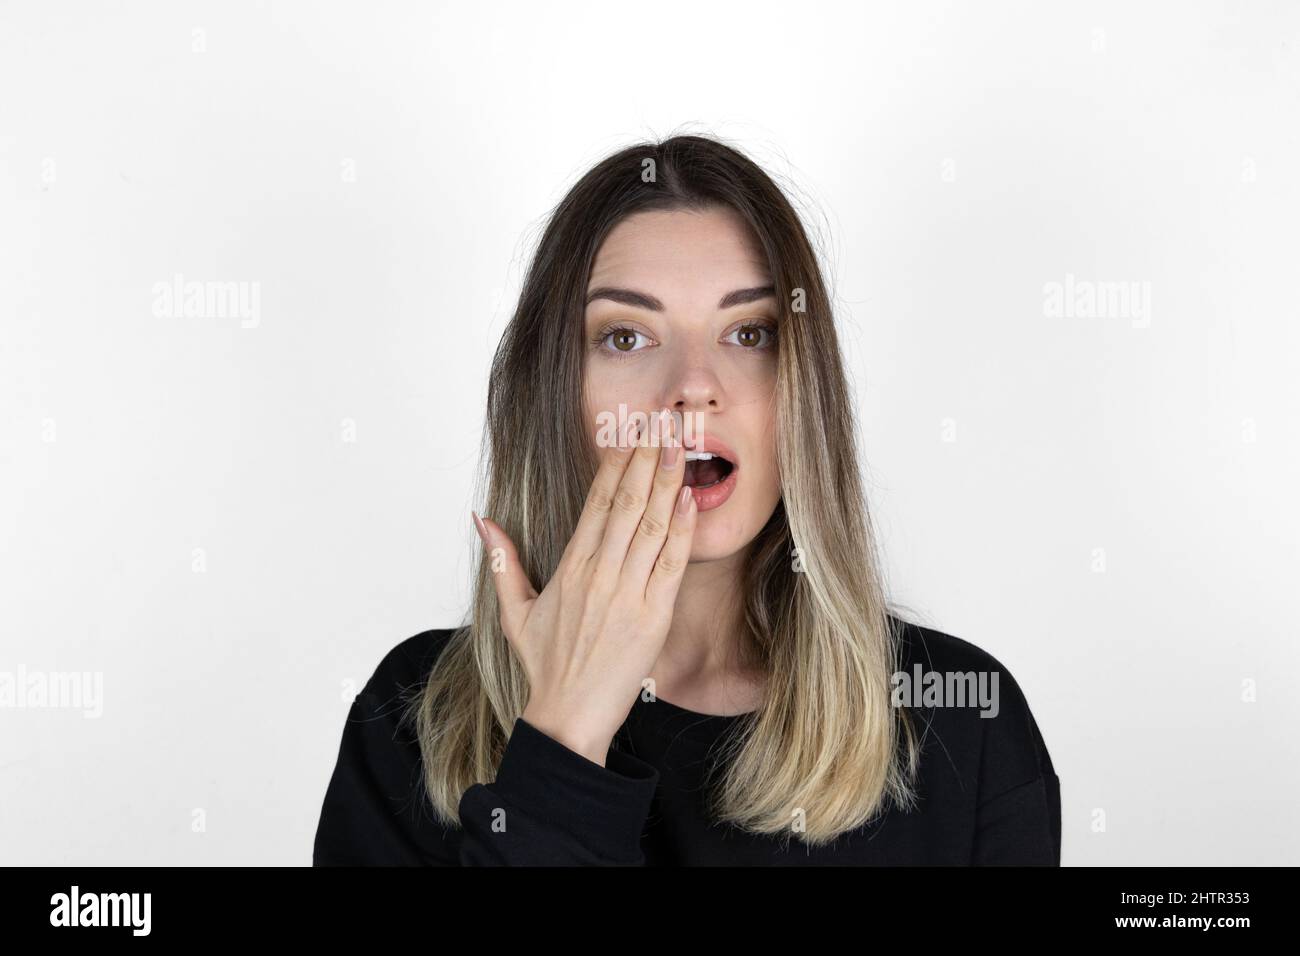 Shocked girl covering mouth with hand. 'Is that for real?!' concept photo on white background. She is looking right.  Text space. Stock Photo